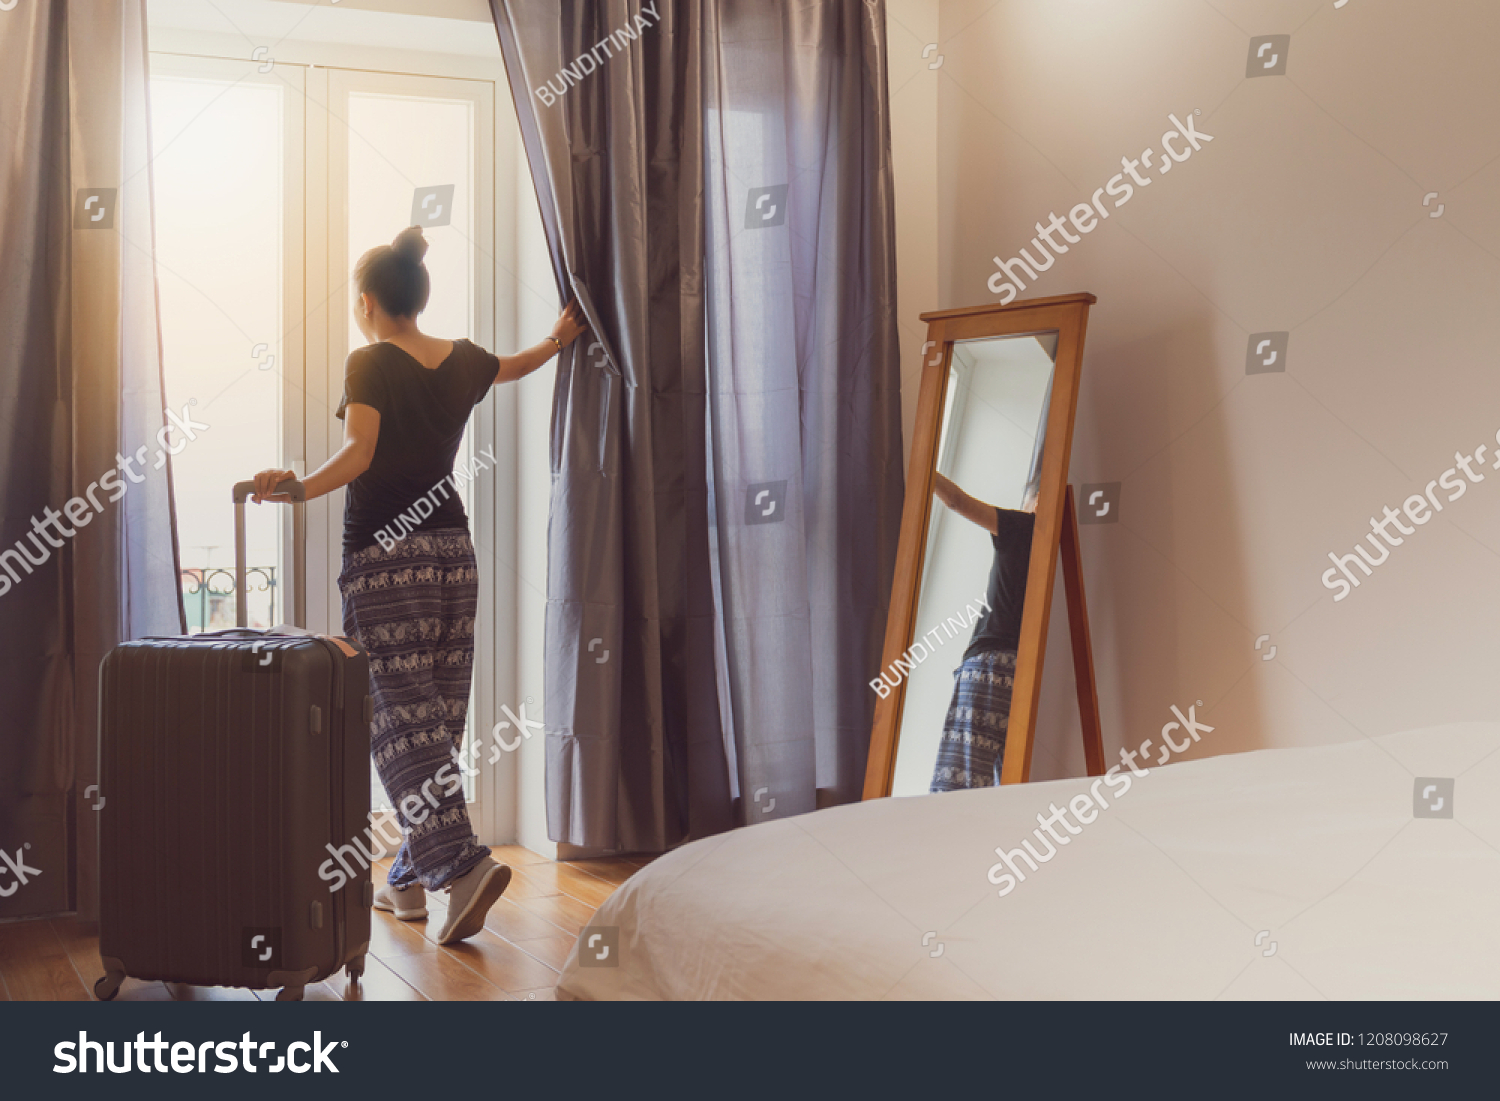 Asian Women Staying Hotel Room Open picture